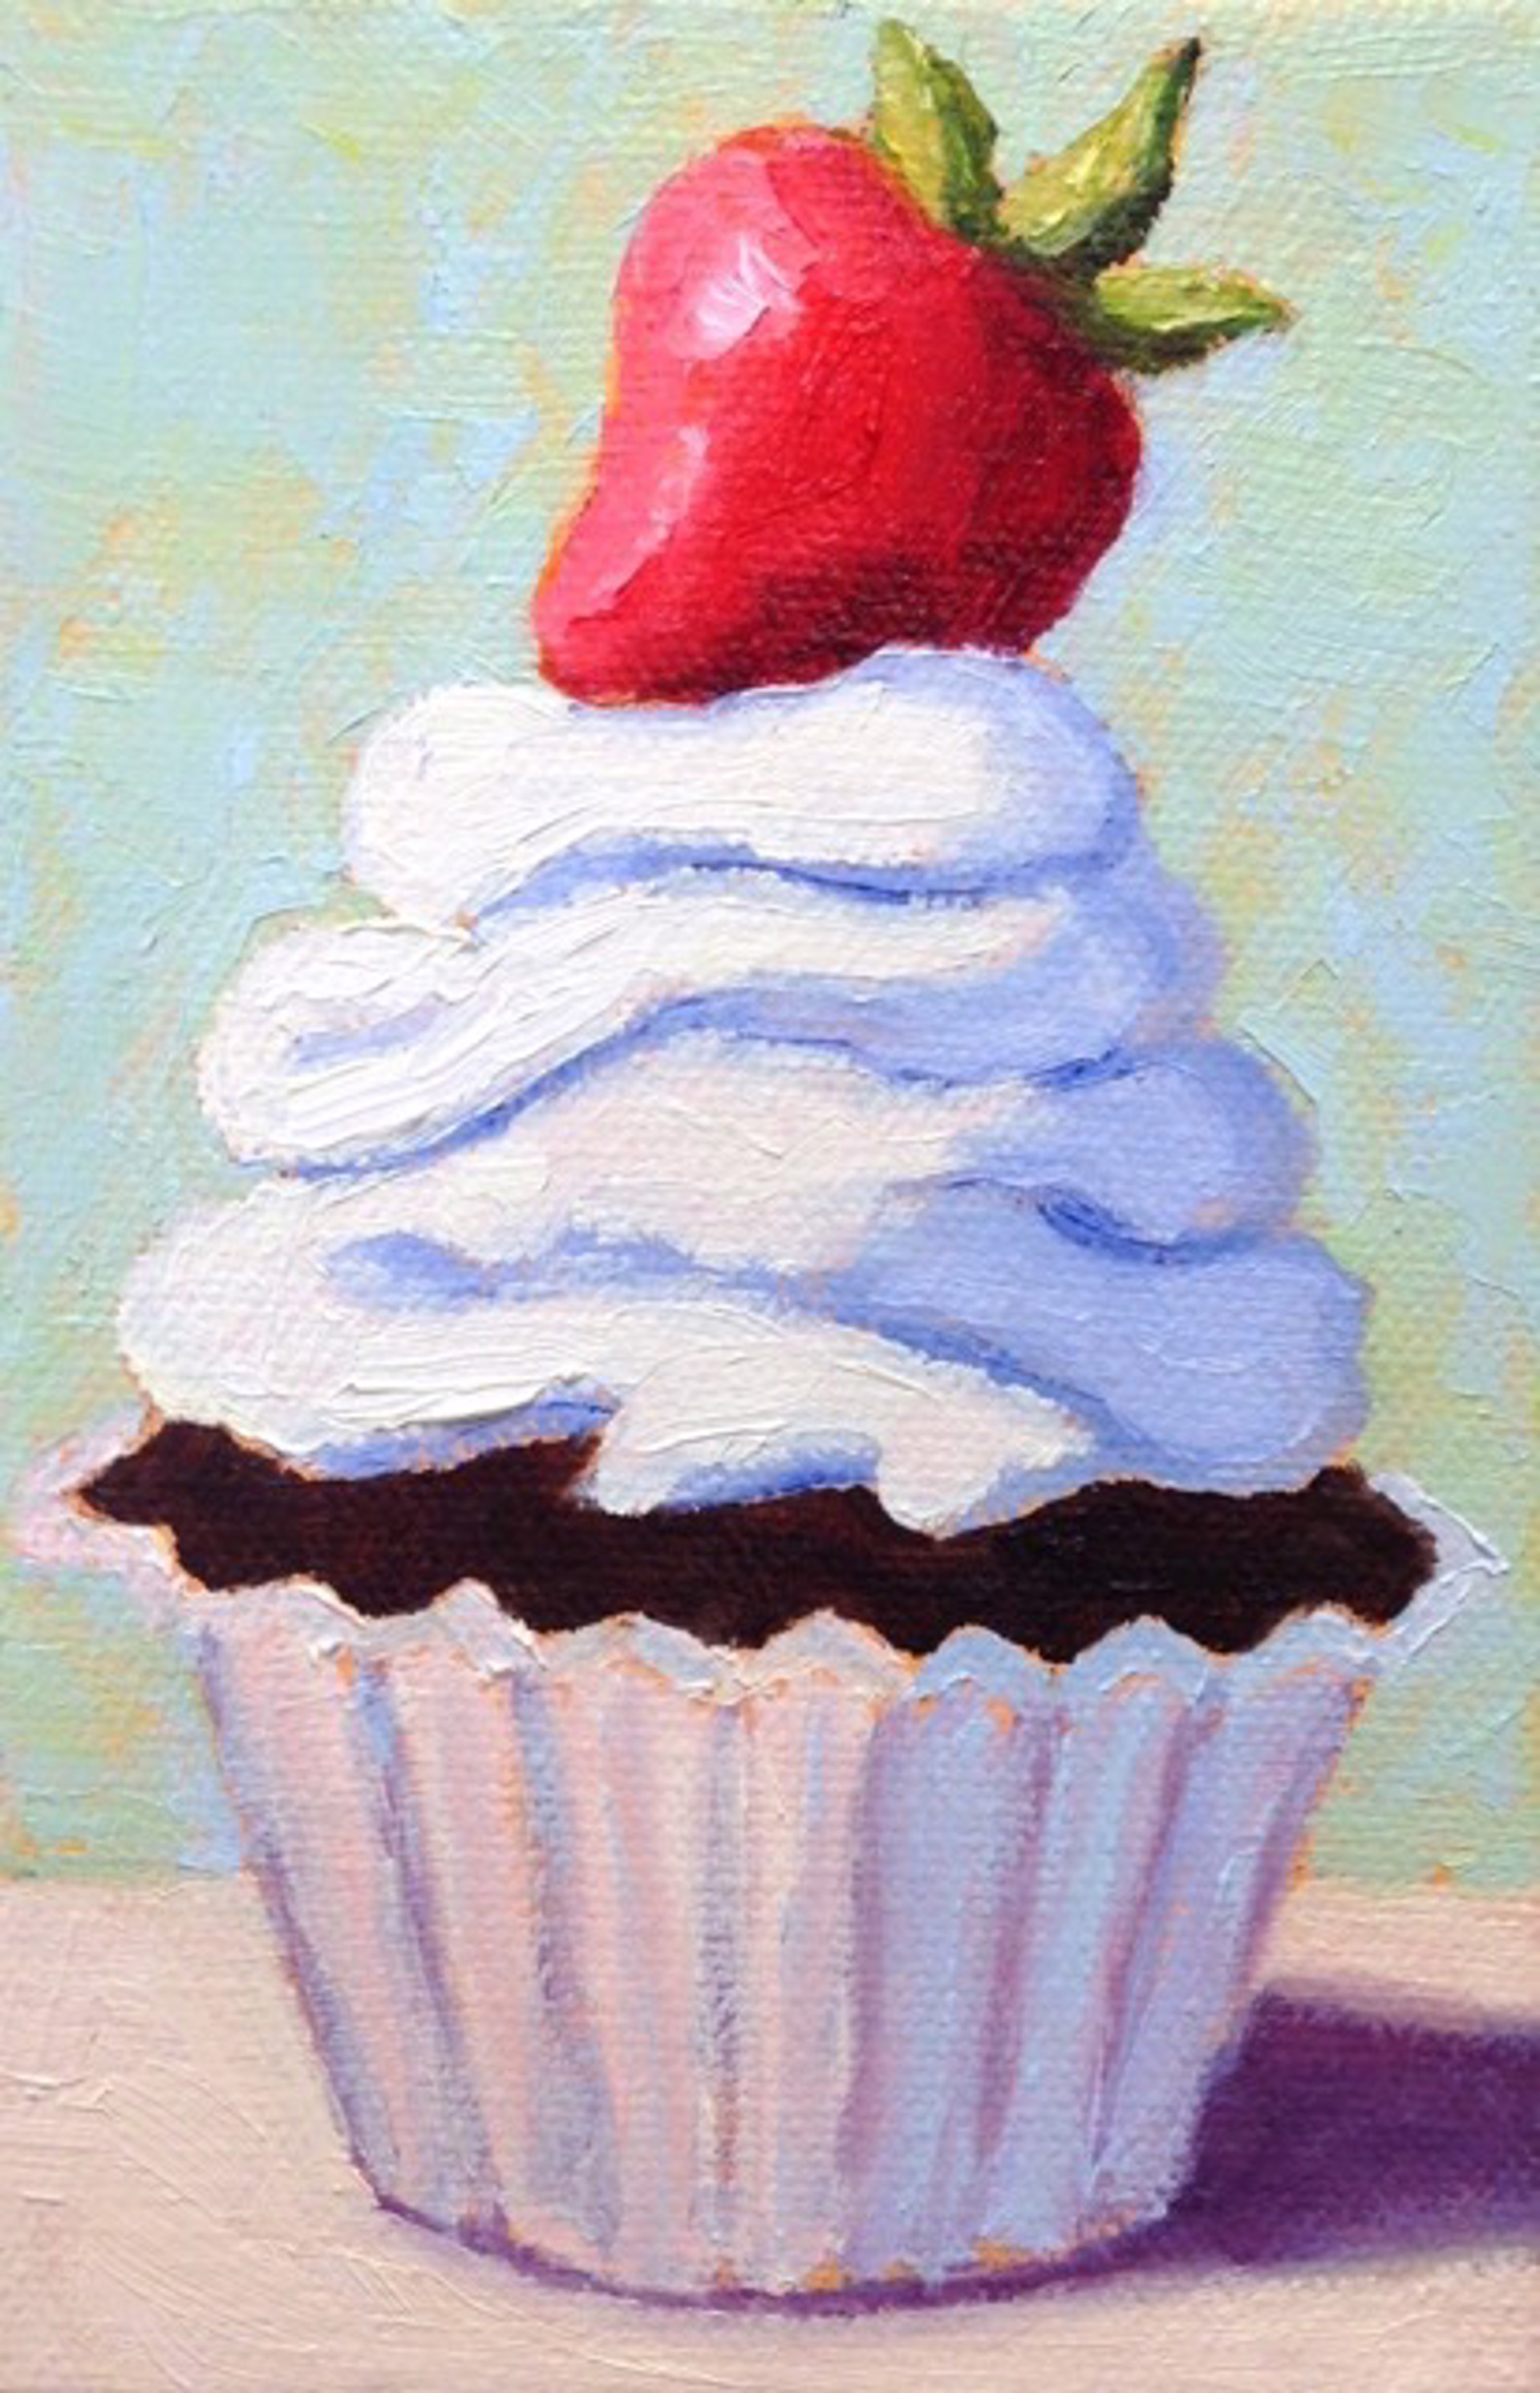 Whipped Cream Cupcake by Pat Doherty